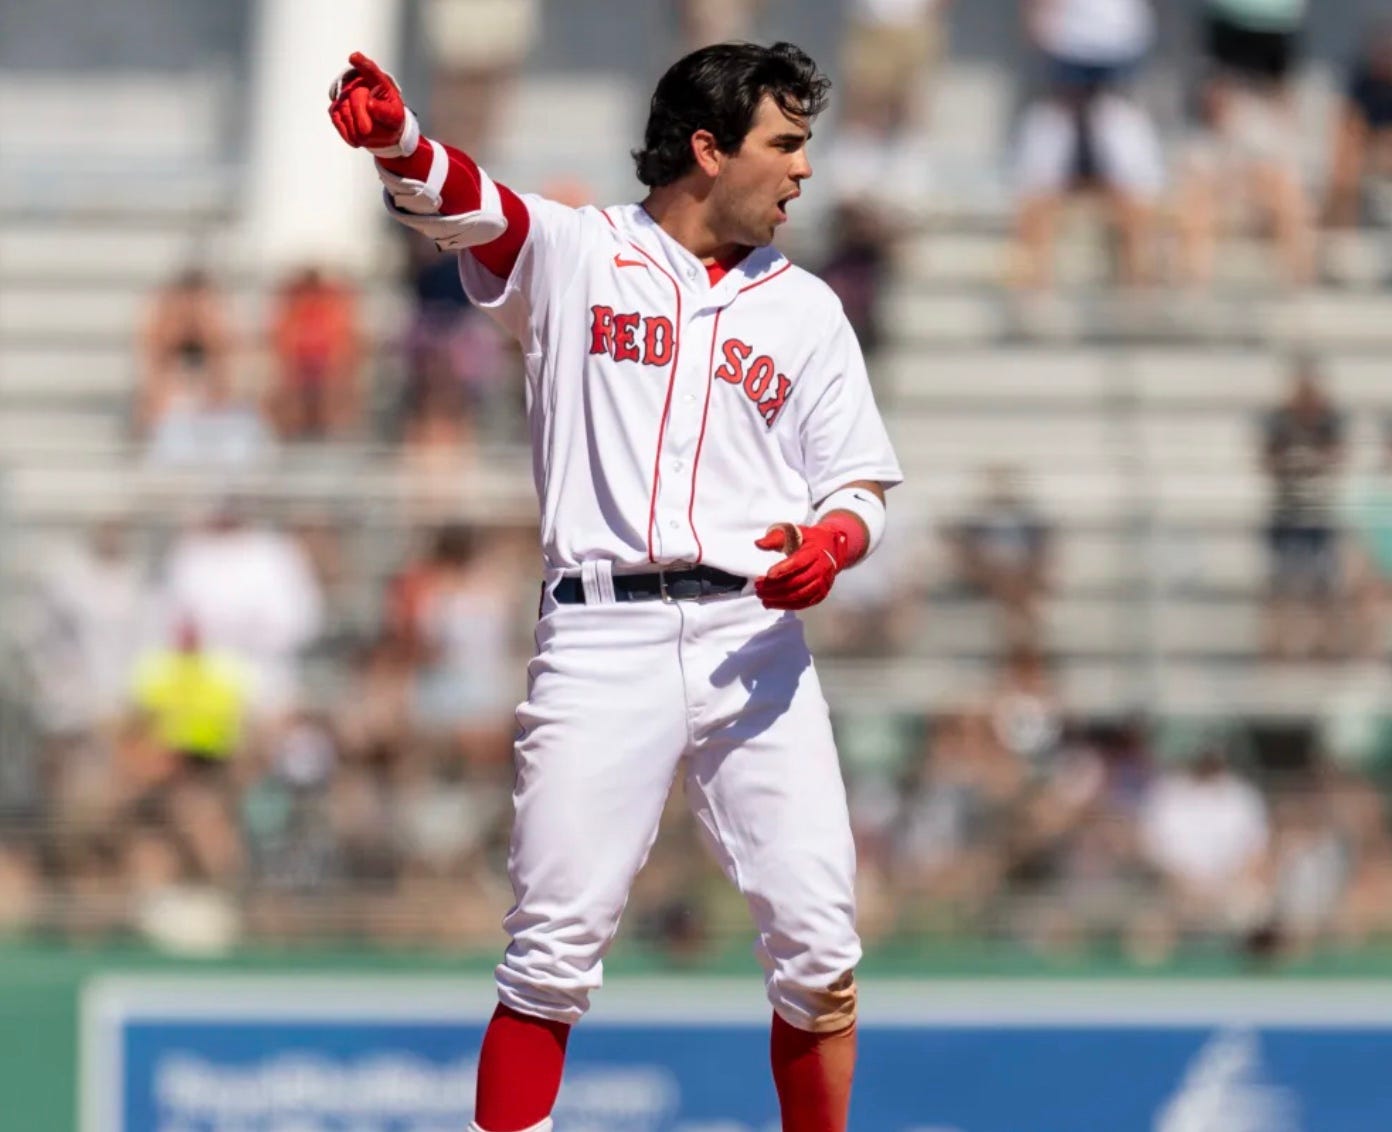 Red Sox Top prospect Marcelo Mayer may get called-up to Boston